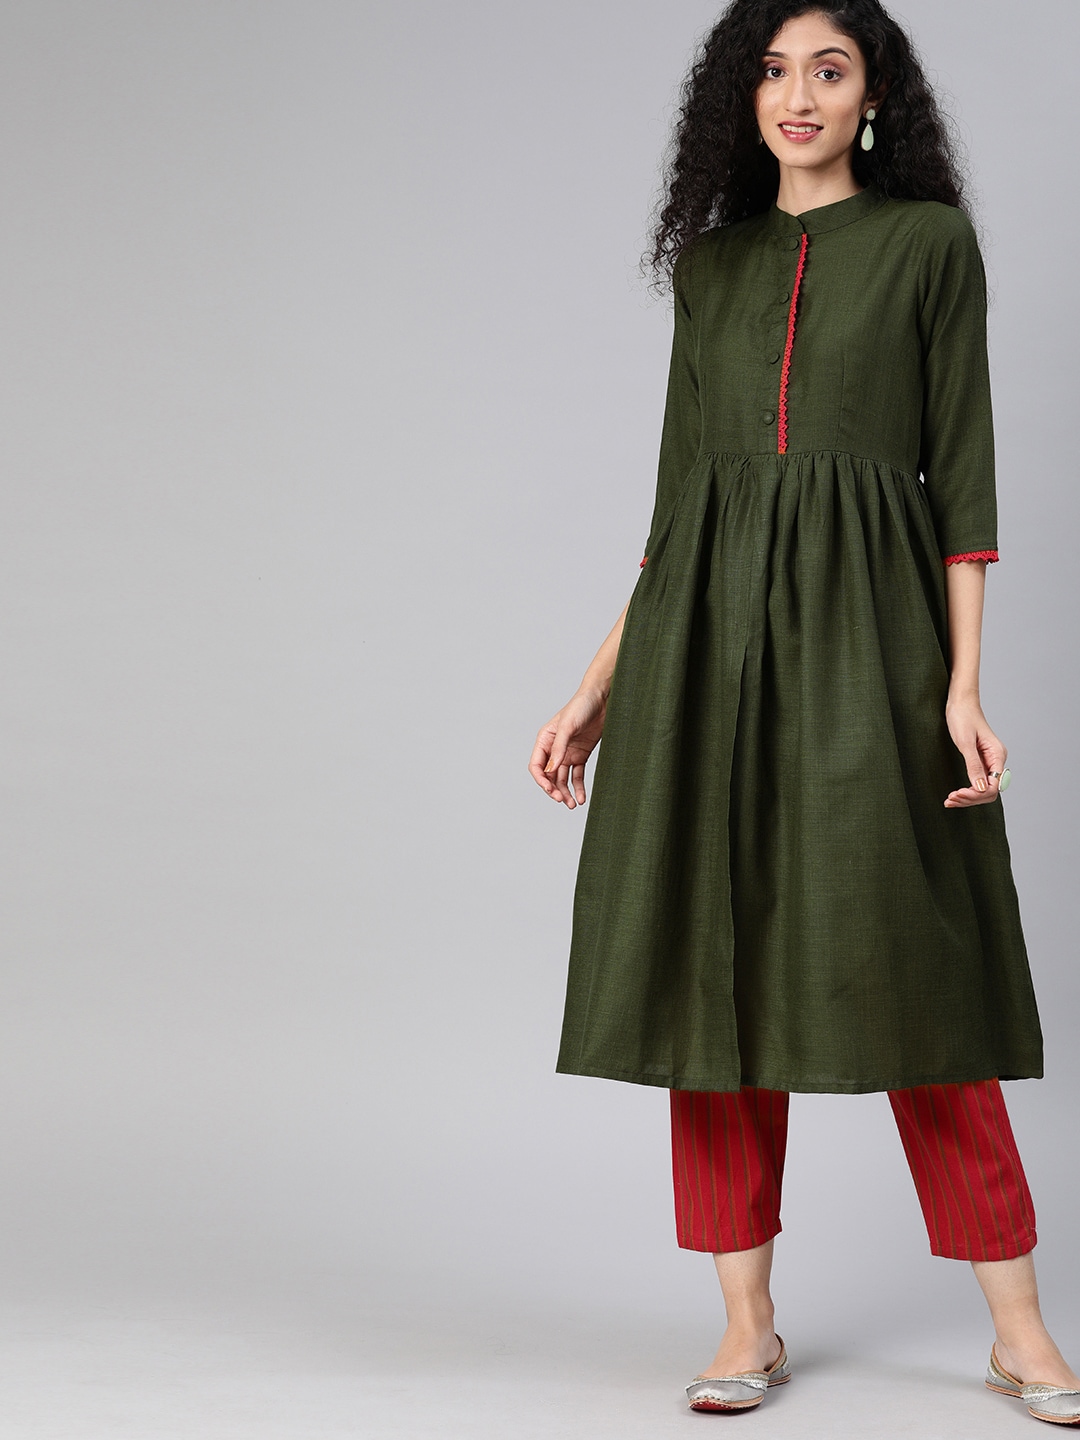 Inddus Women Olive Green Solid Kurta with Red Striped Cropped Trousers